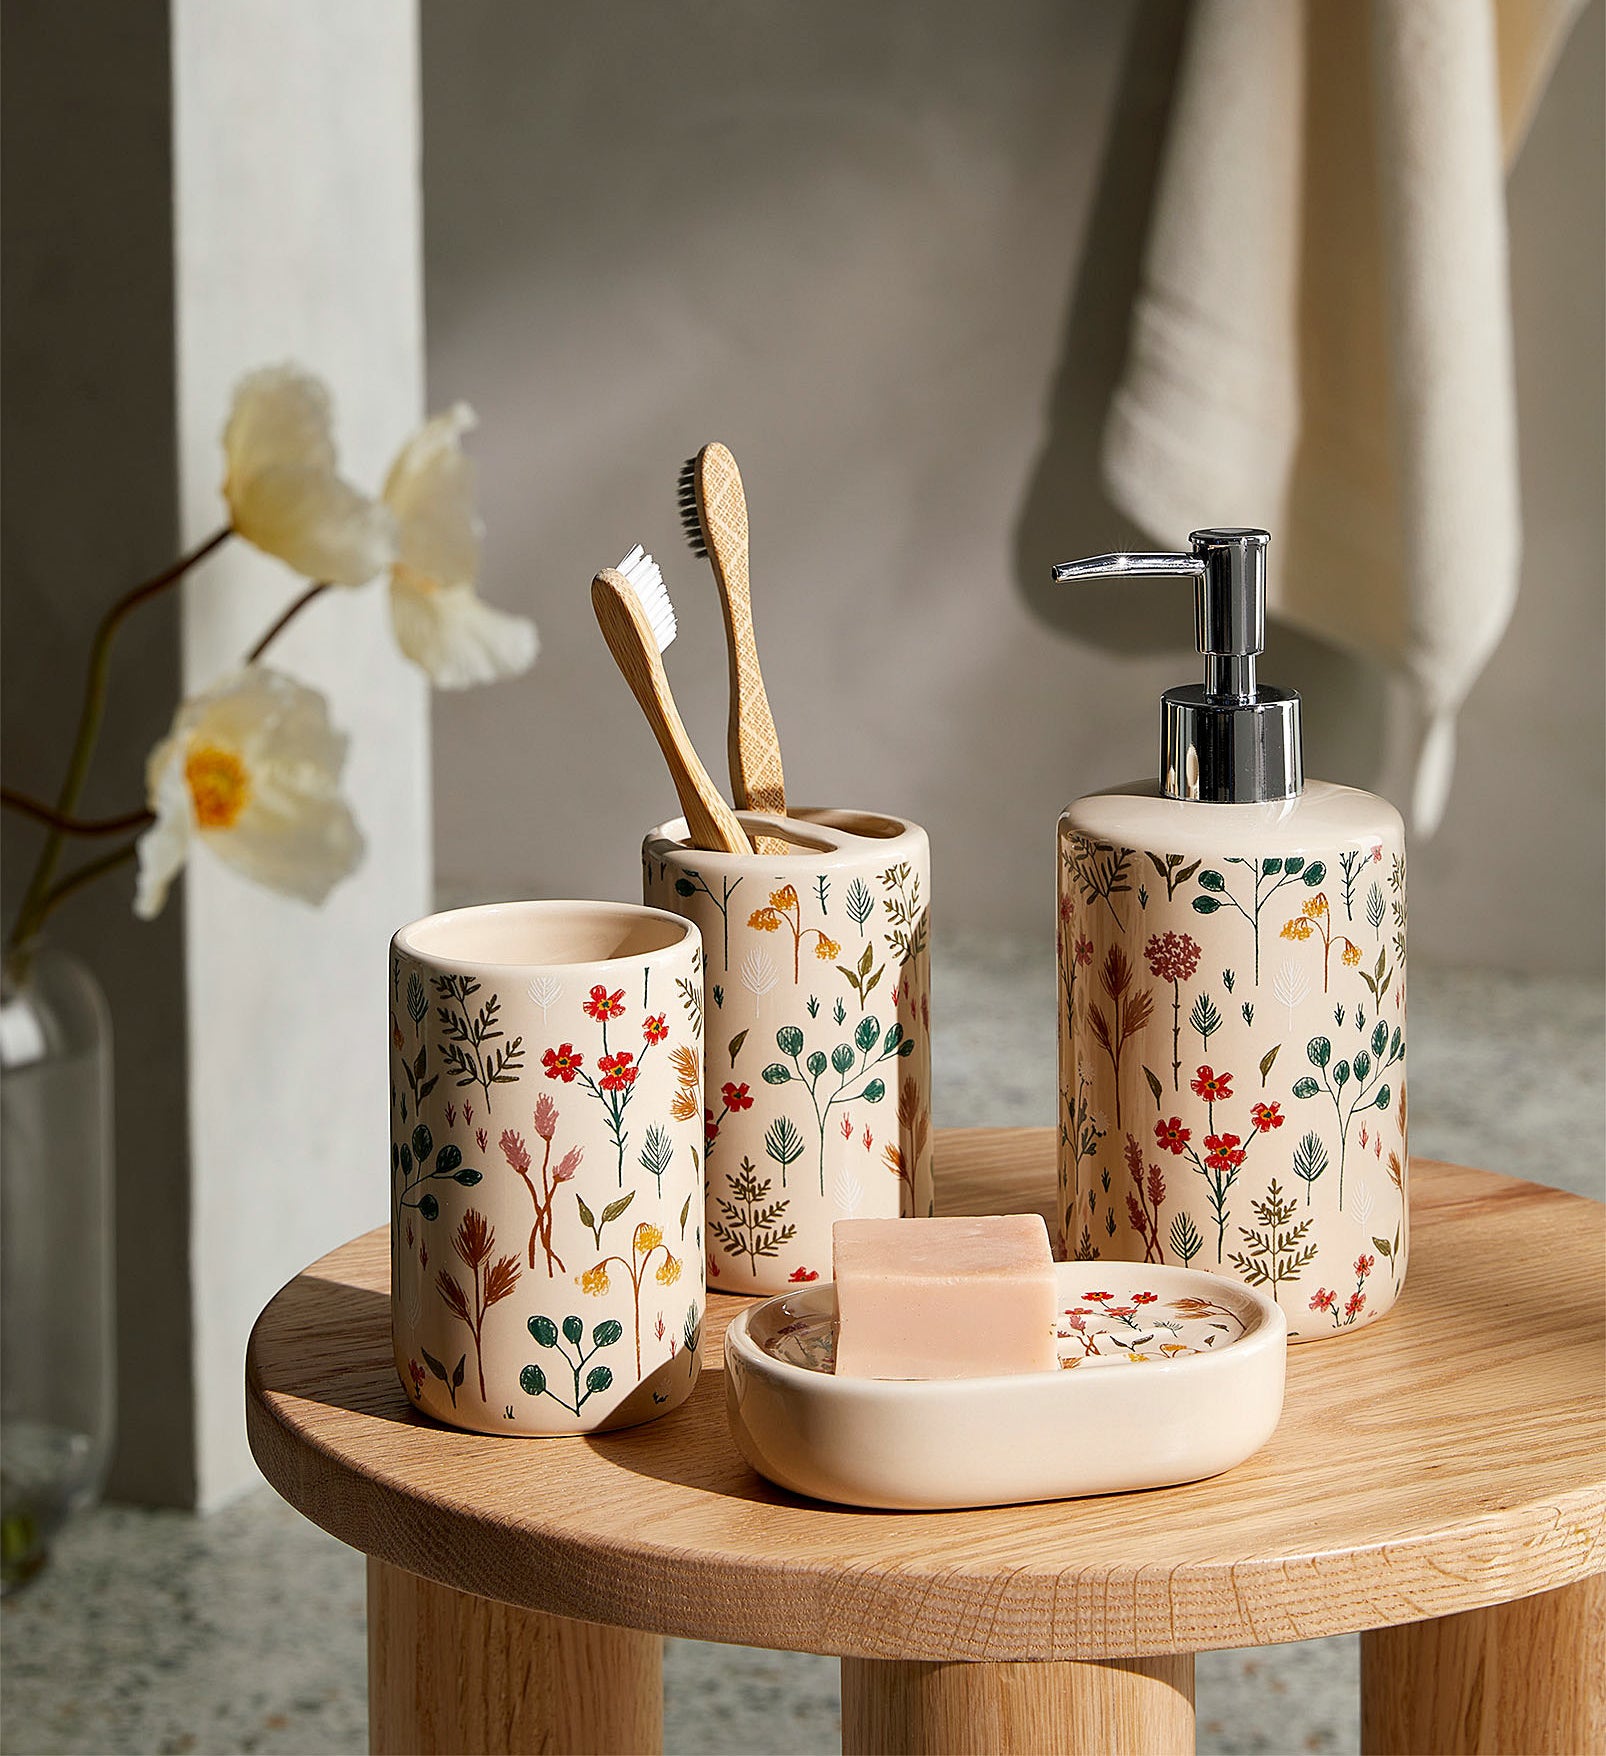 a set of bathroom accessories with floral patterns on each